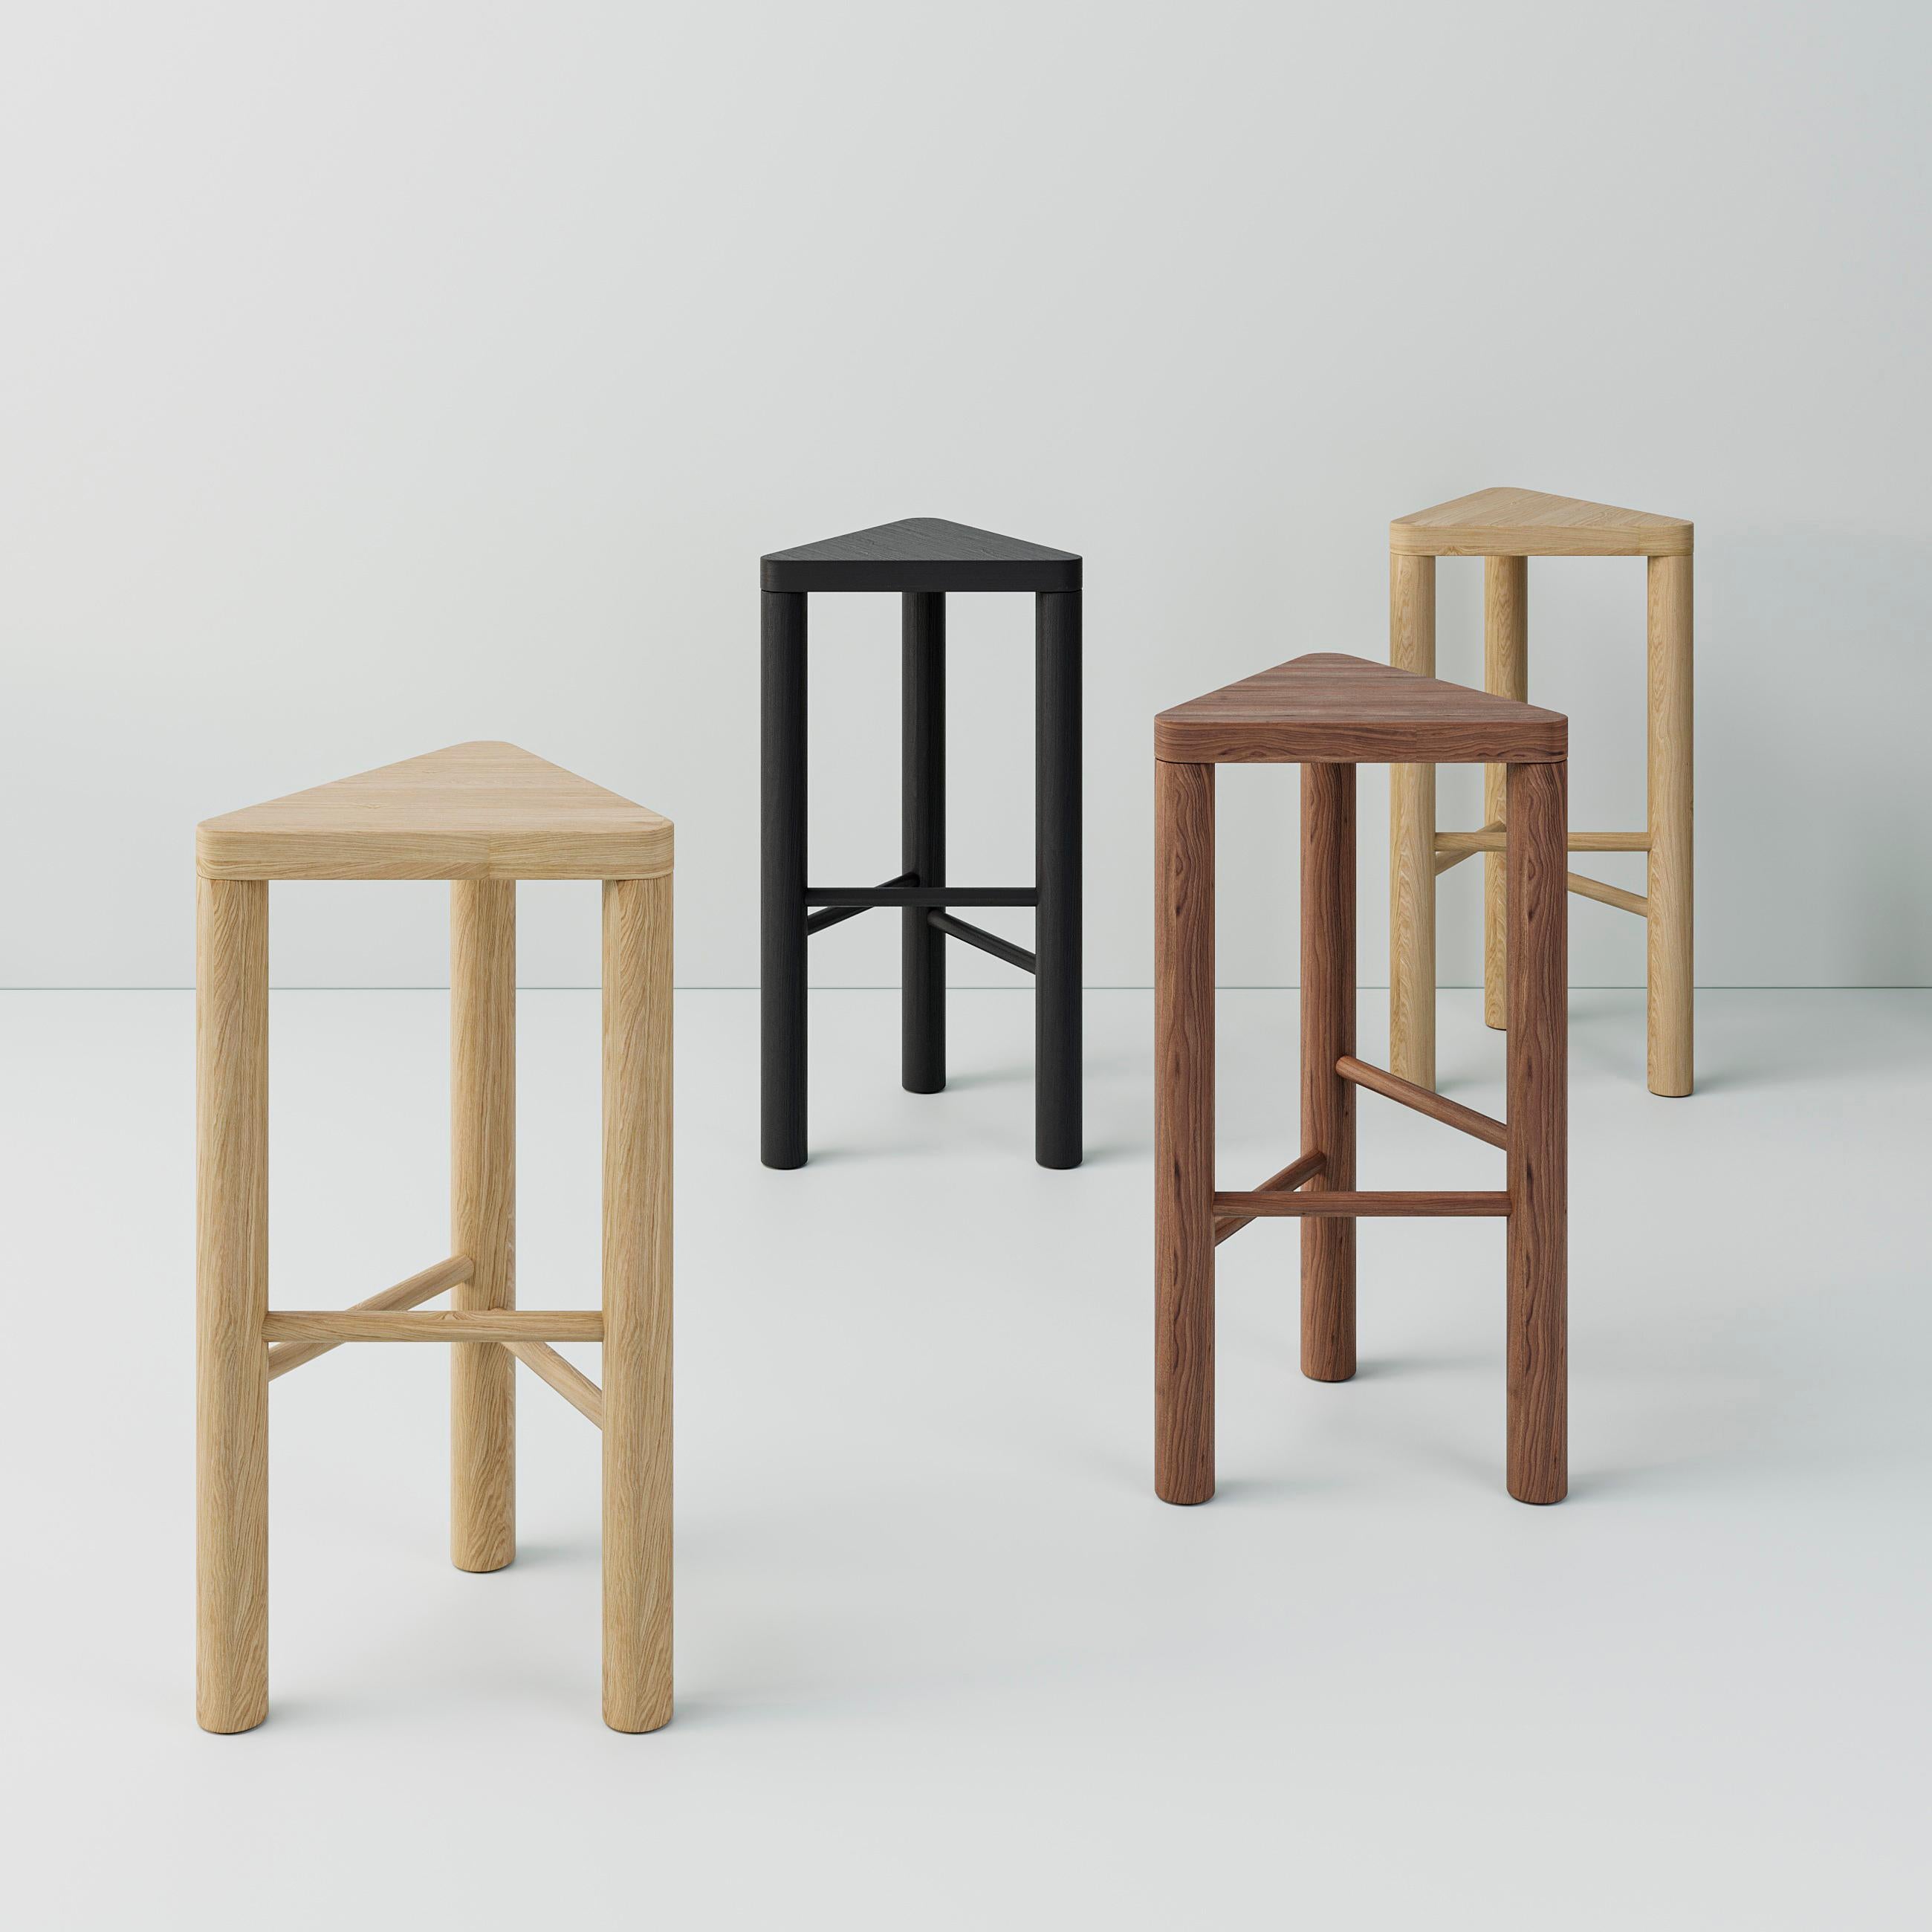 Organic Modern Contemporary Wooden Stool 'Anyday' by Oitoproducts, Natural